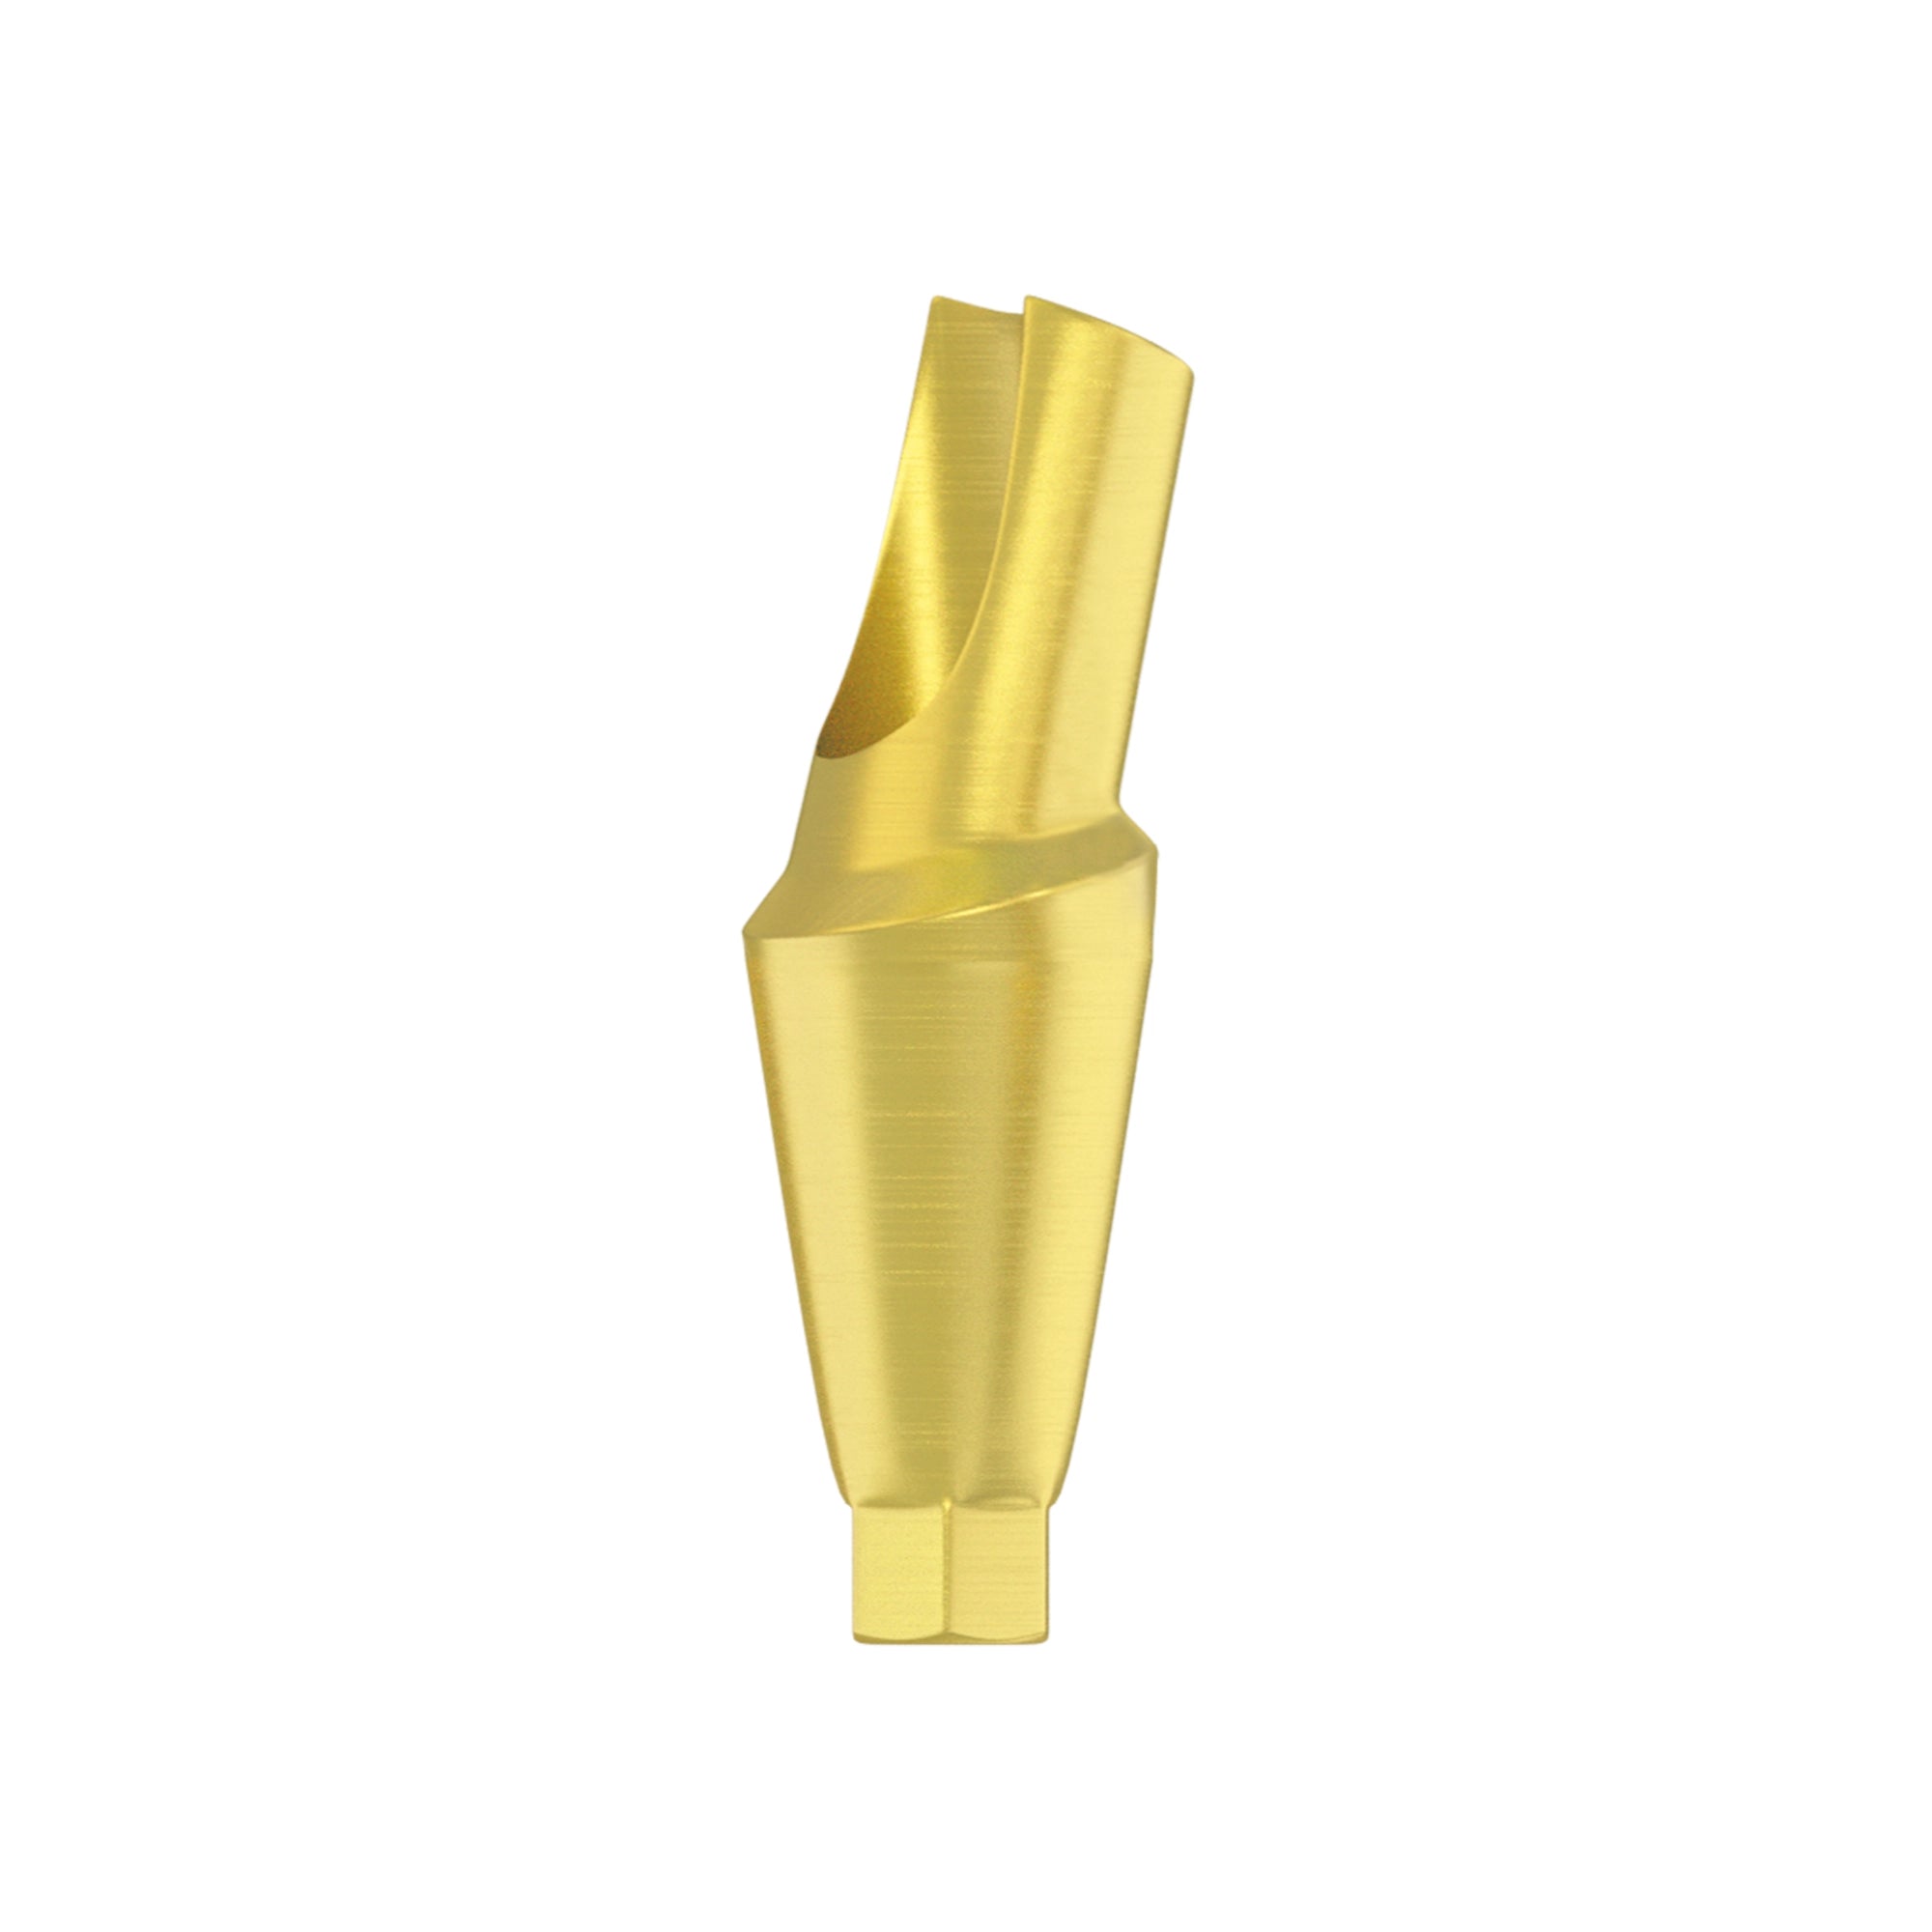 DSI Angulated 15° Anatomic Abutment 3.6mm - Conical Connection RP Ø4.3mm-5.0mm